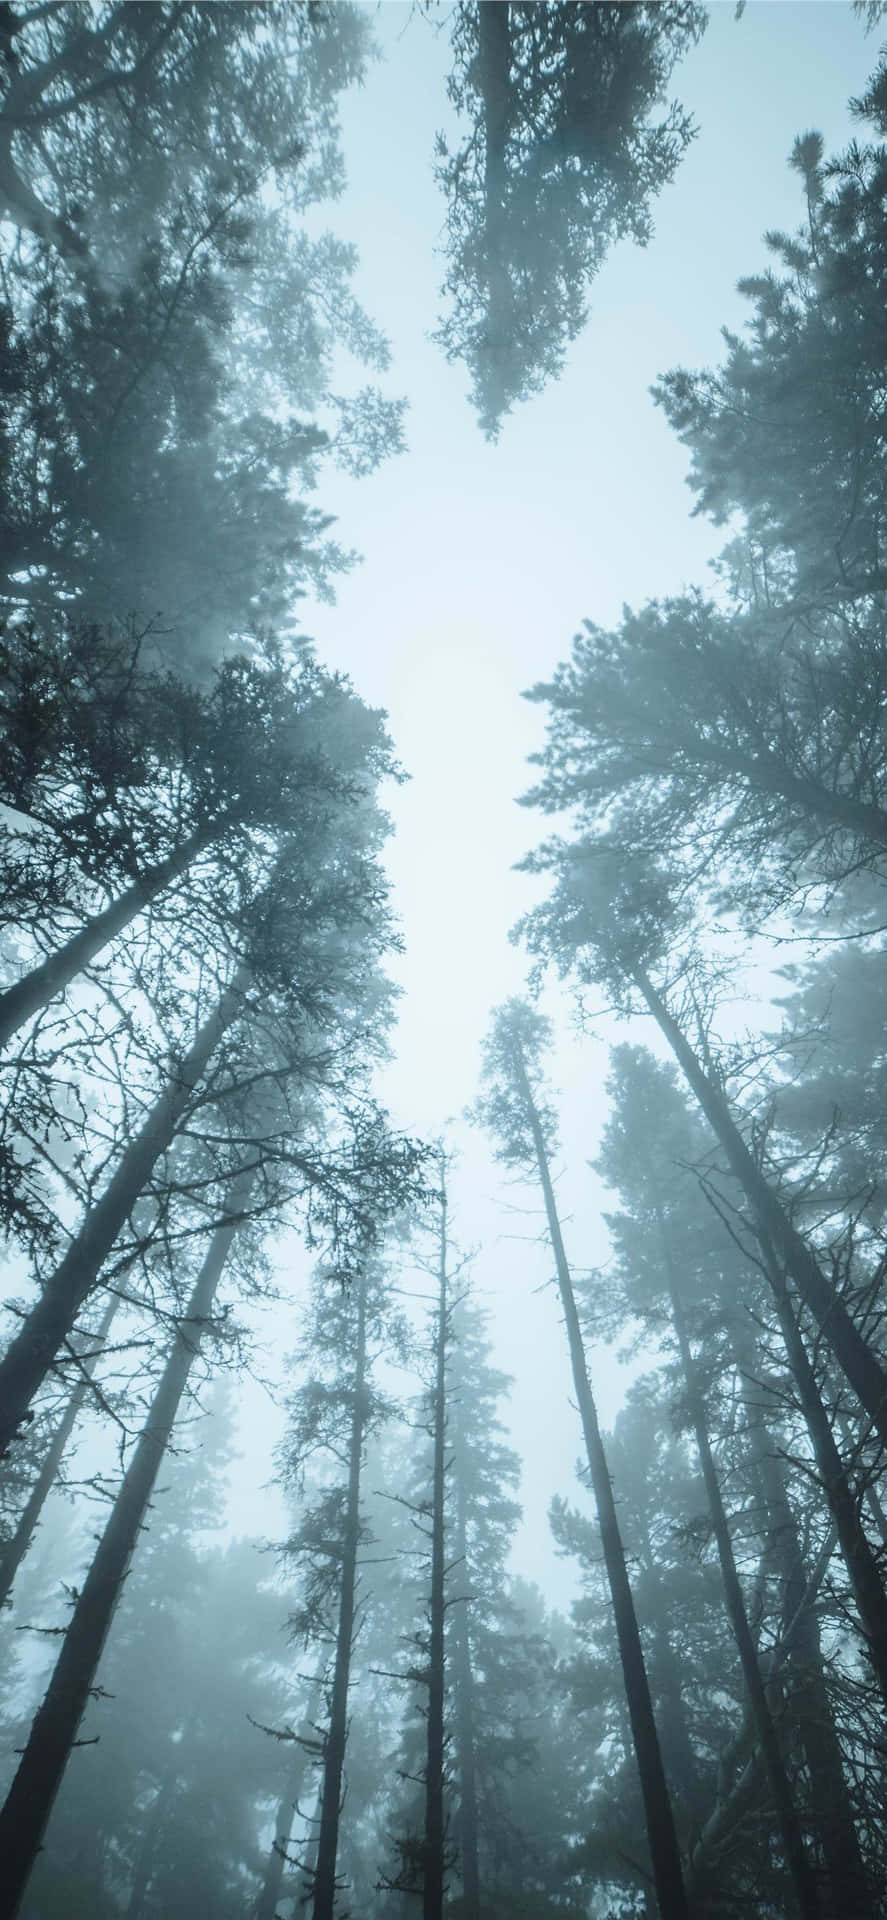 Misty Forest Canopy View.jpg Wallpaper